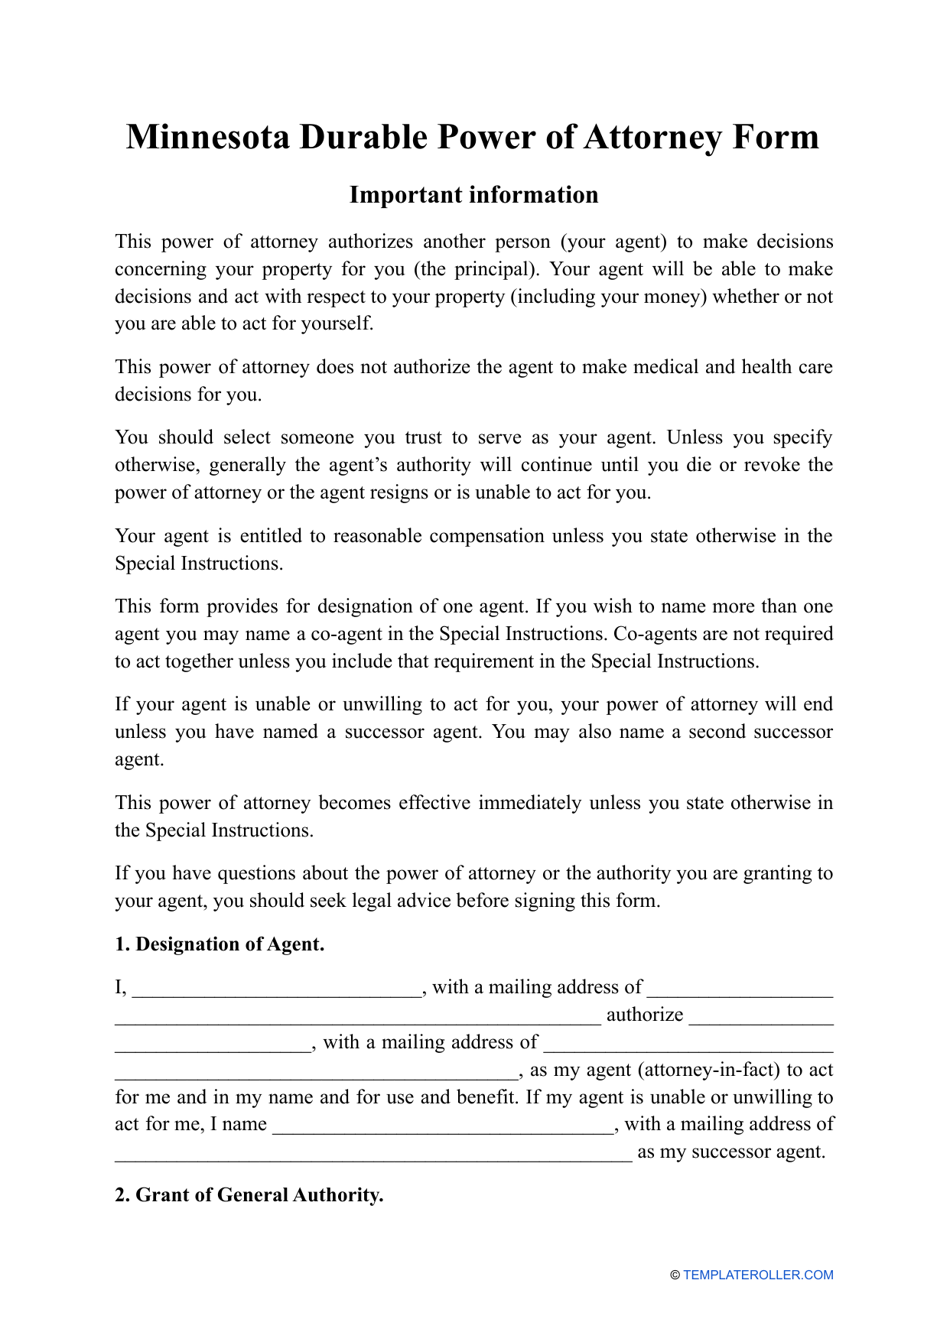 Durable Power of Attorney Form - Minnesota, Page 1